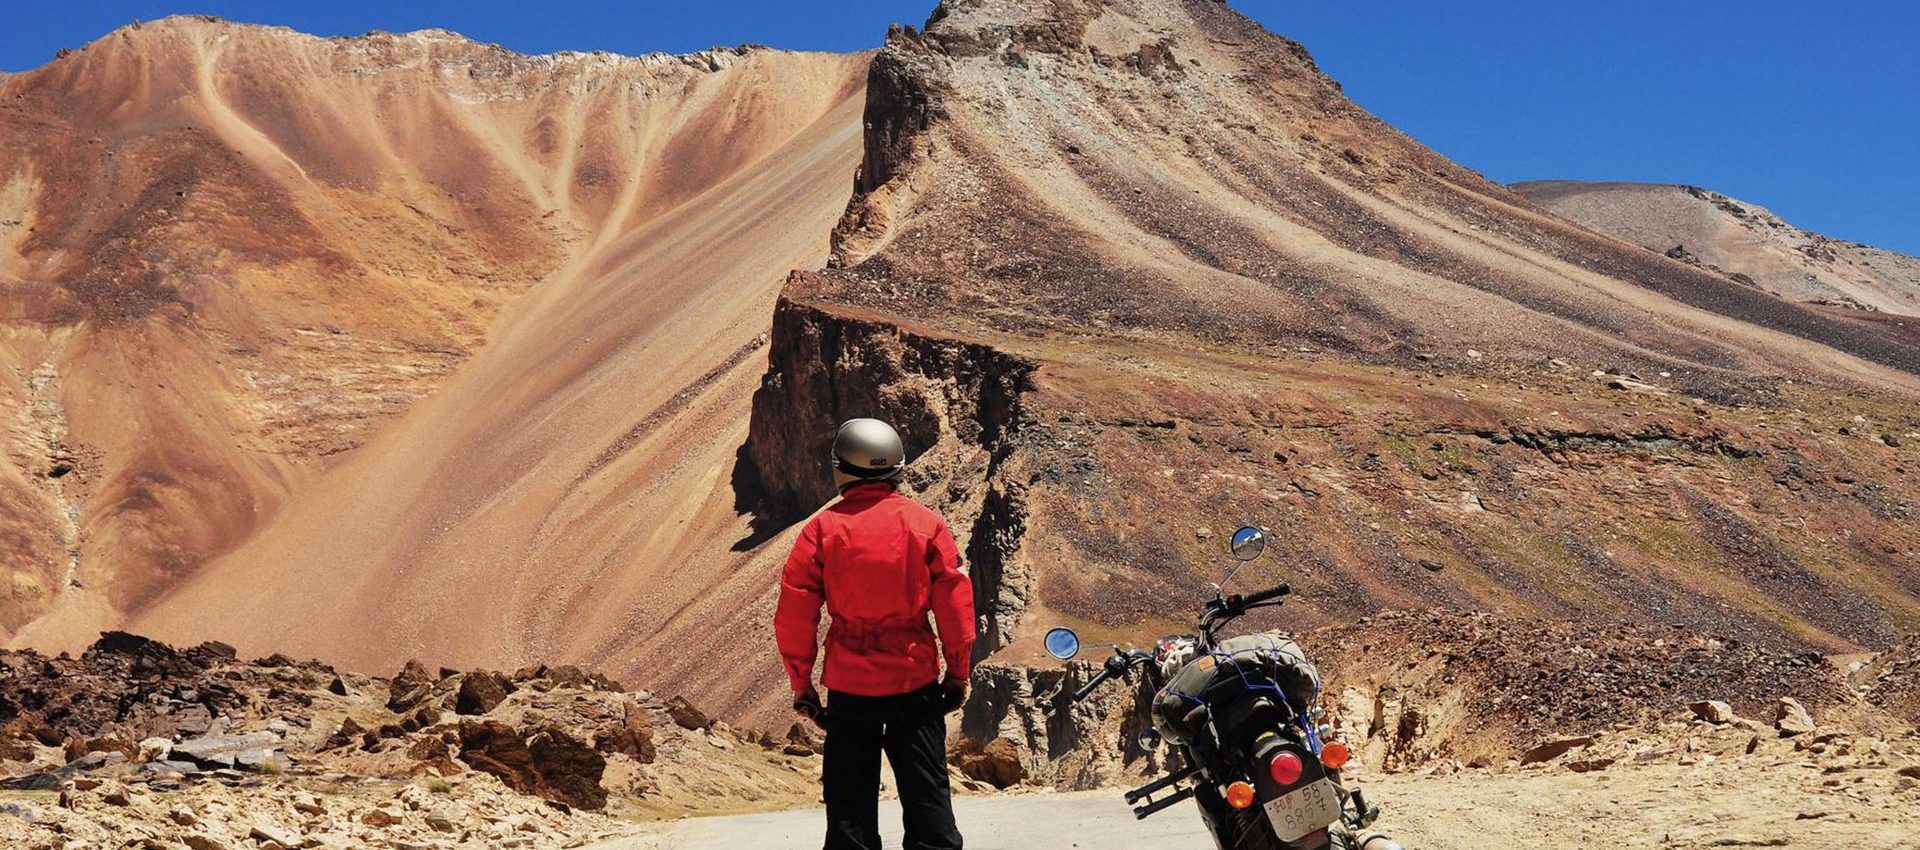 The motorcycle ride of your life through majestic peaks of the Himalayas on the world's highest motorable road.